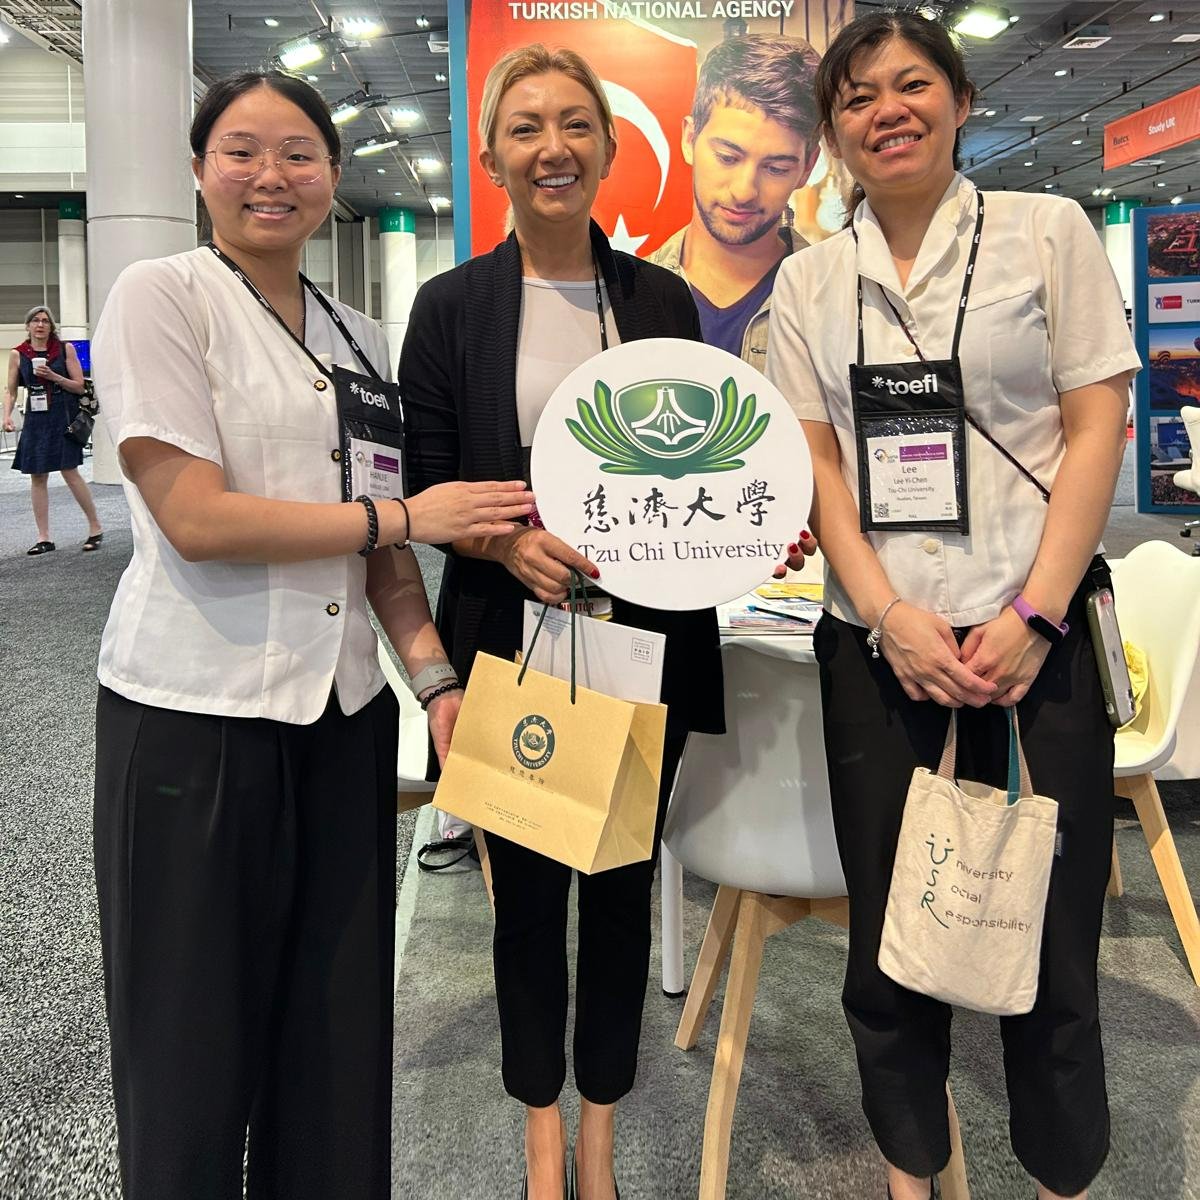 Istanbul Aydin University and Tzu Chi University from Taiwan had a great meeting on the last day of #NAFSA2024! Excited to explore new avenues for potential collaborations. #IAUatNAFSA #GlobalPartnerships #NAFSAMeetings